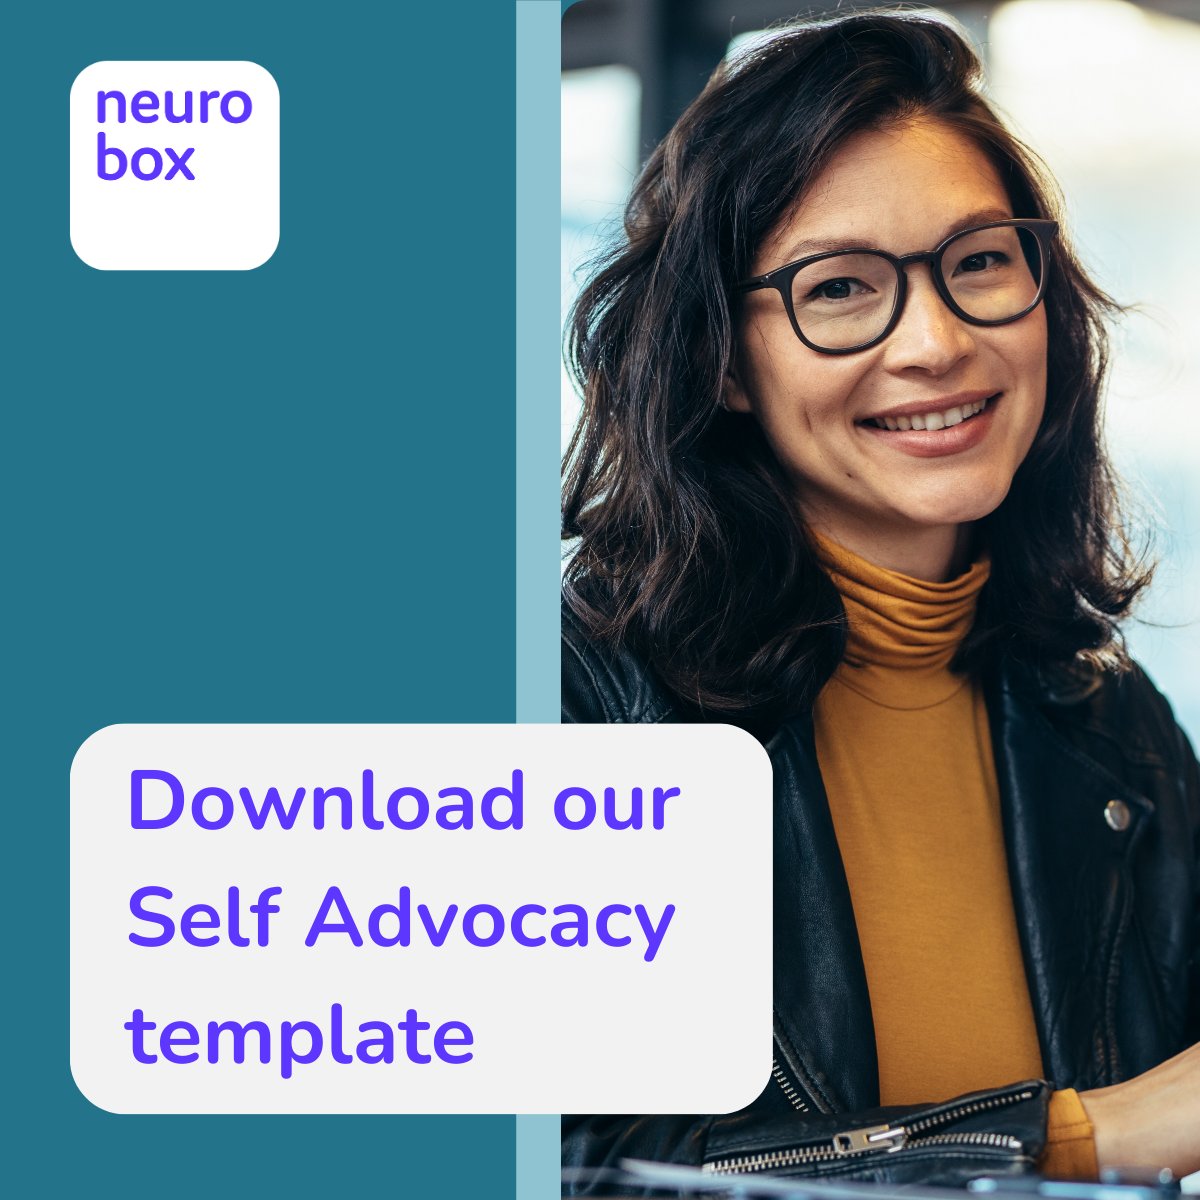 Organisations frequently ask us how to encourage disclosure within their workforce. 

Although there is no 'quick-win, one size fits all' answer, a great way to do this is through a self-advocacy document - eu1.hubs.ly/H08rHNC0

#FindingYourVoice #NeurodiversityAtWork